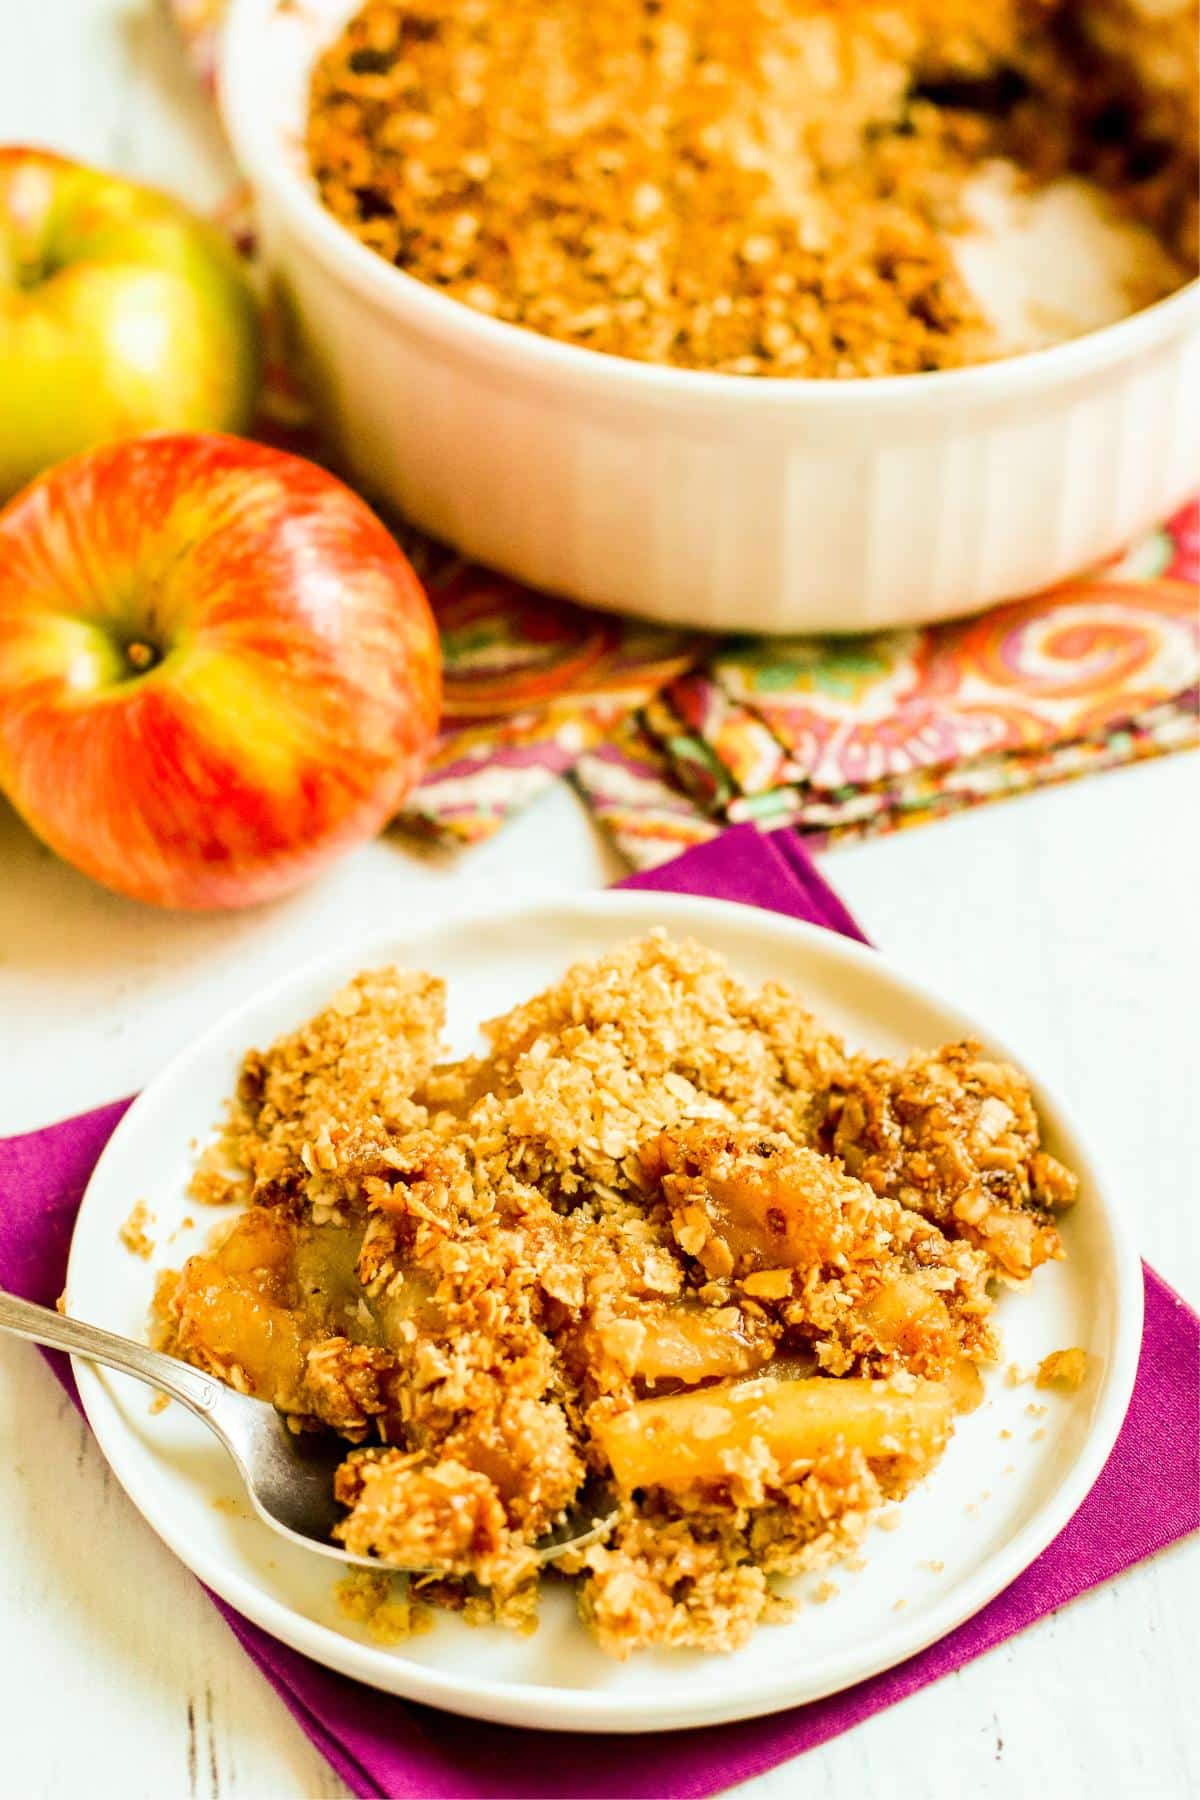 Plate with a spoon in a serving of vegan apple crisp with apples and baking dish in the background.